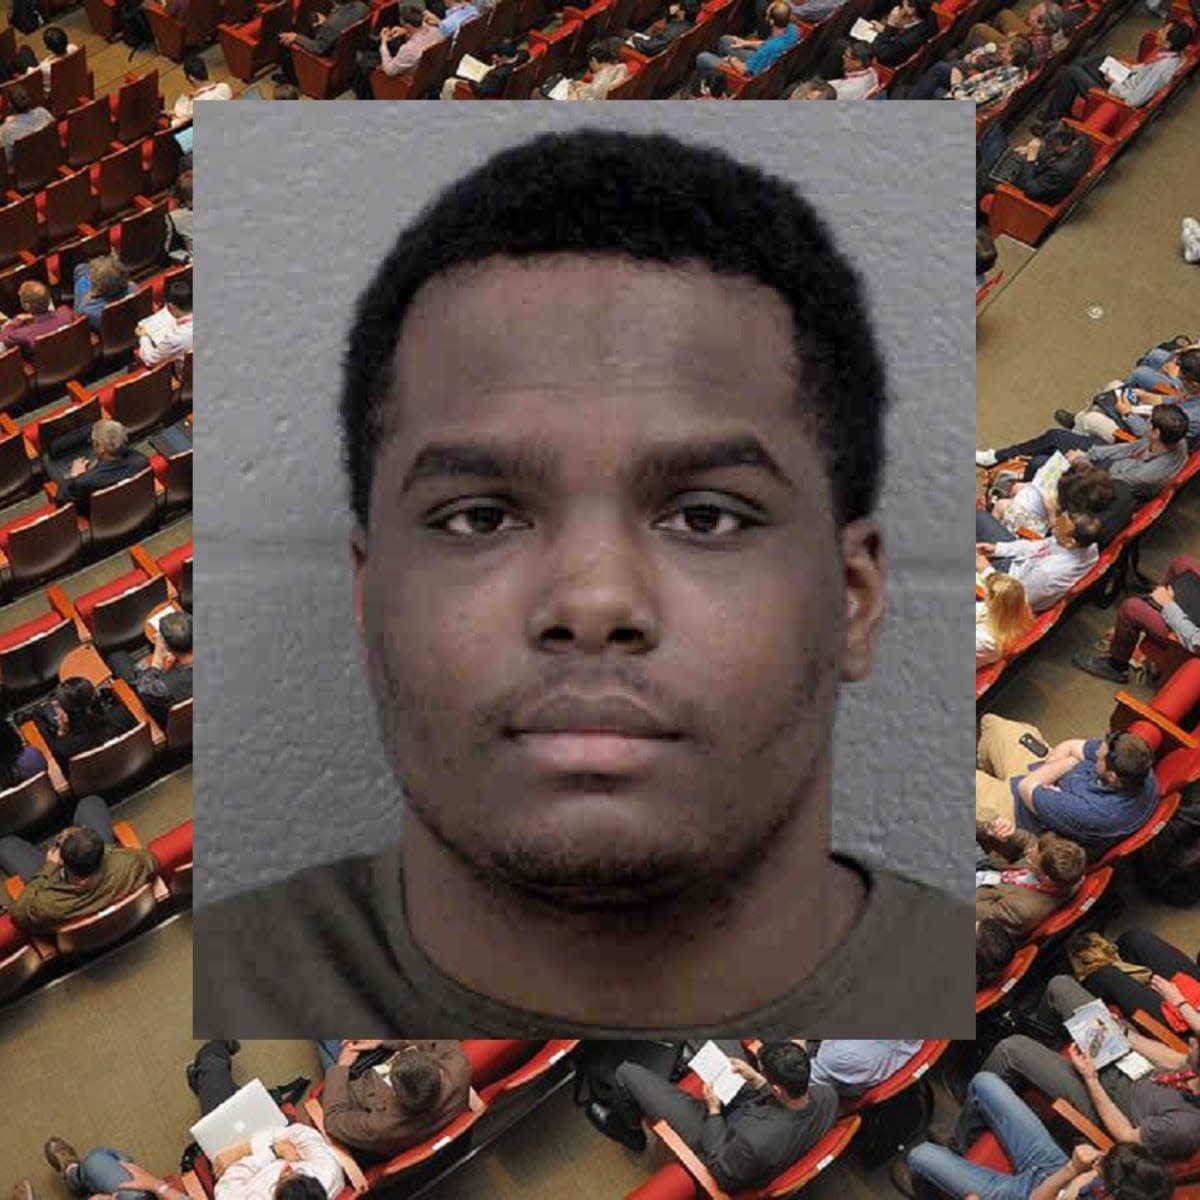 A man was convicted of raping a 13-year-old girl he met at a church conference